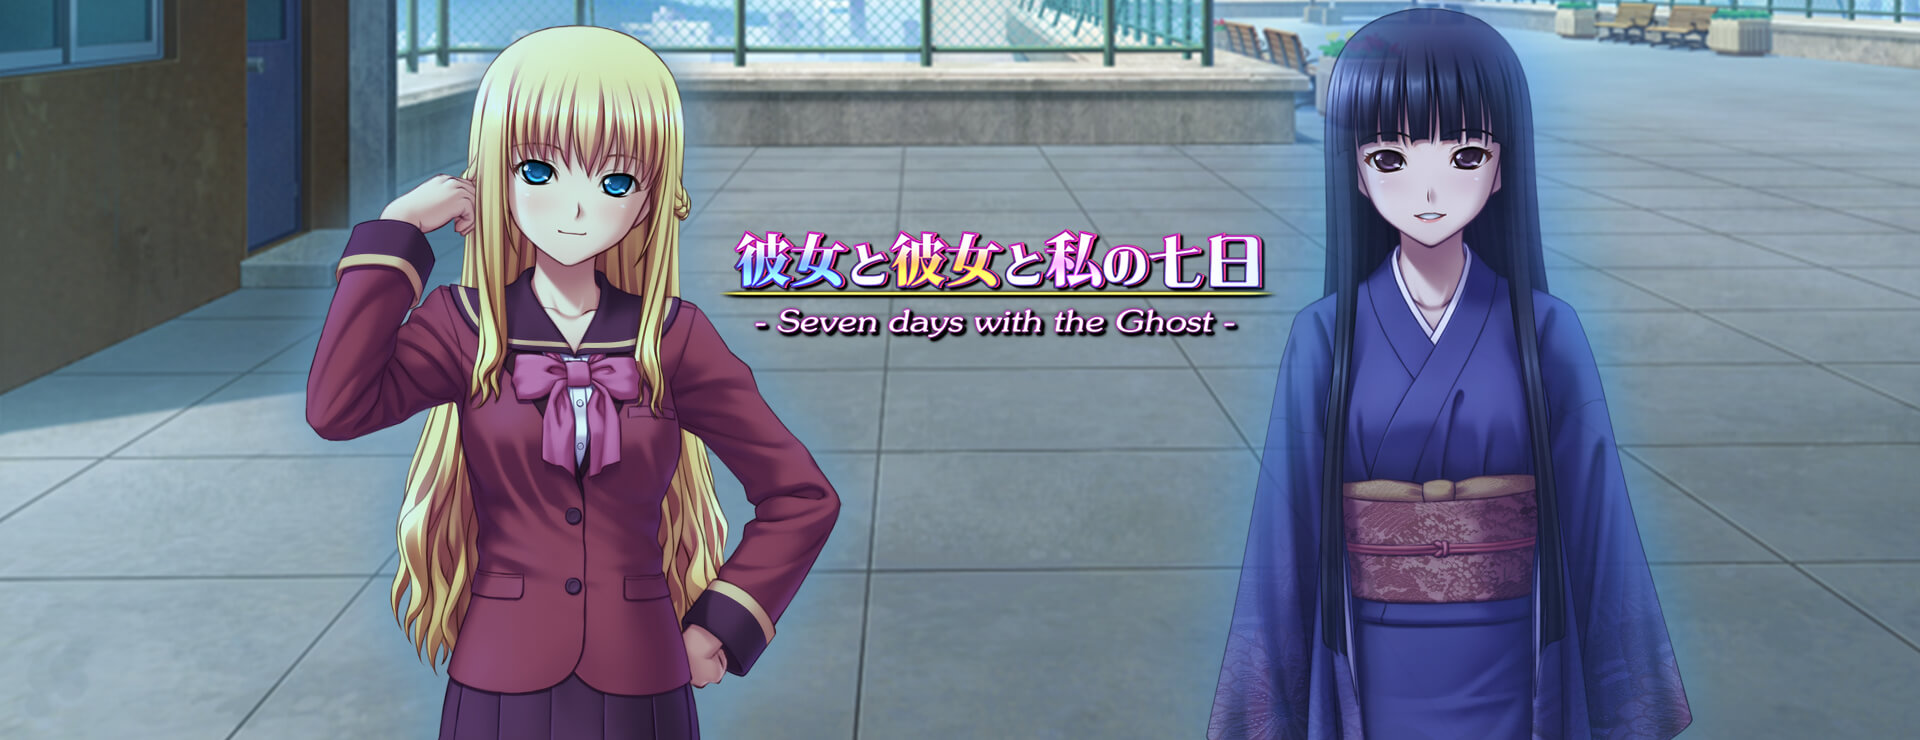 Seven Days With A Ghost - Visual Novel Game